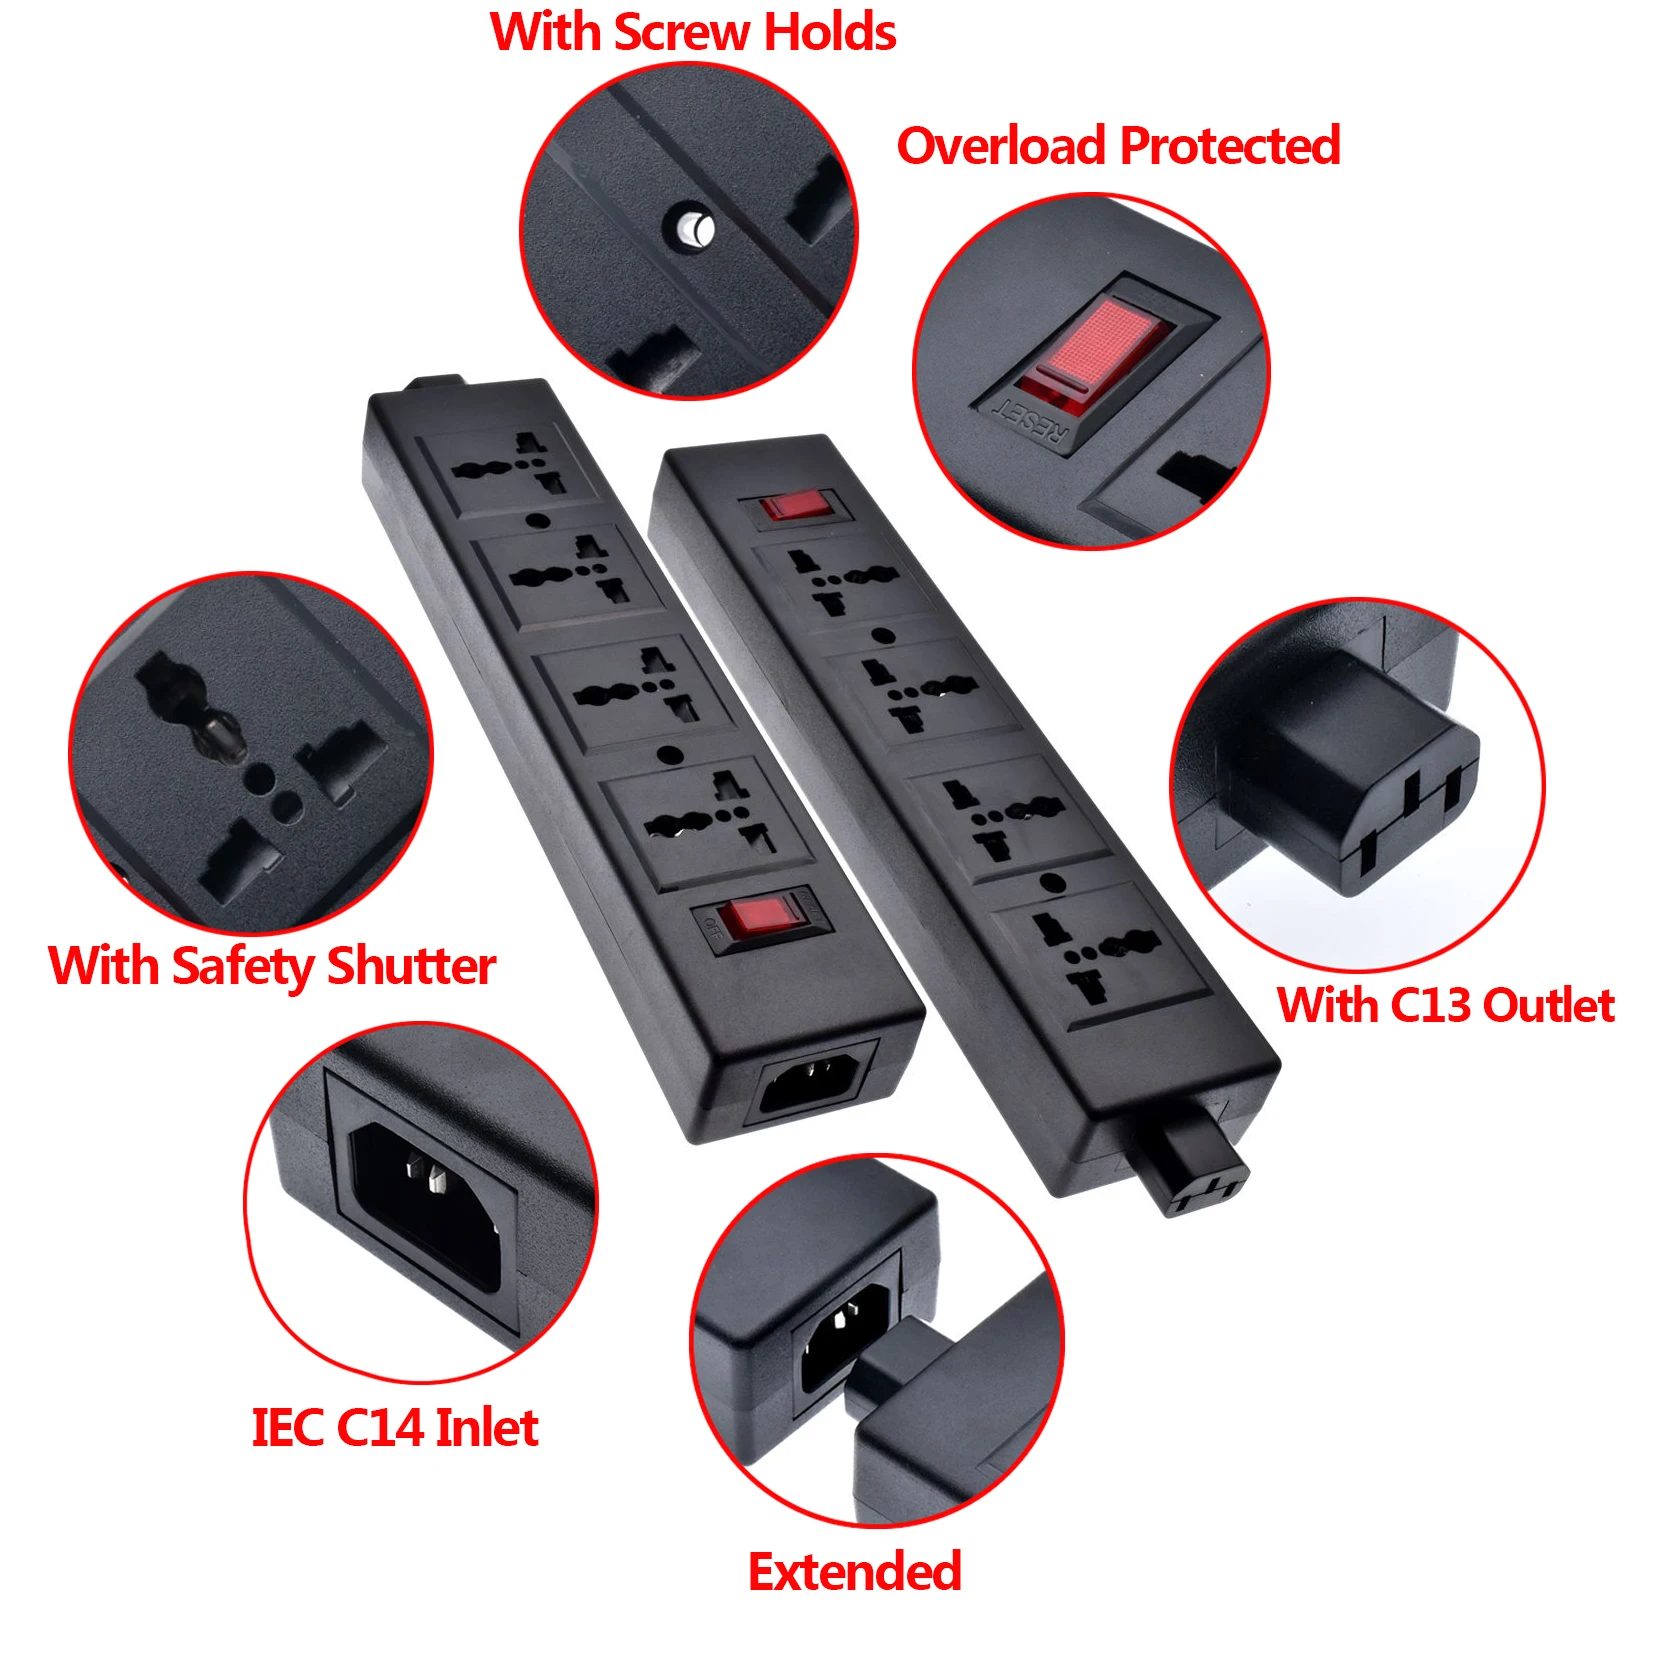 PDU Power Strip Extended for laboratory Overload Protector ,with safety  Shutter Universal Outlet extend with IEC320 C13 Outlet